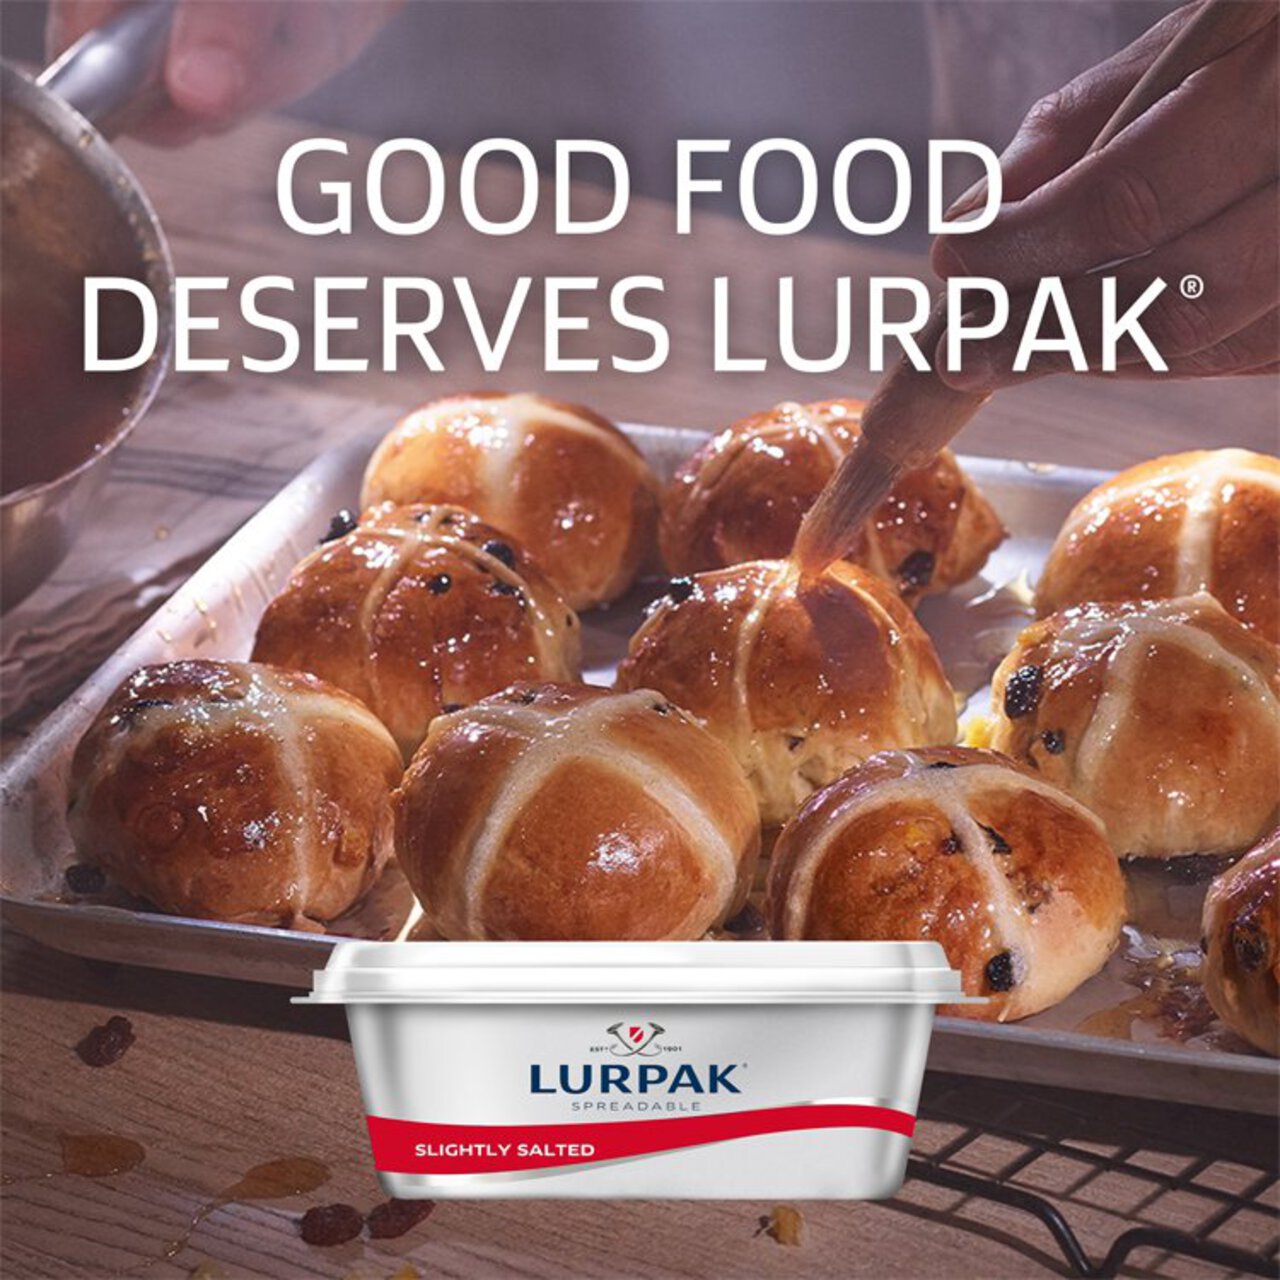 Lurpak Unsalted Spreadable Blend of Butter and Rapeseed Oil 500g